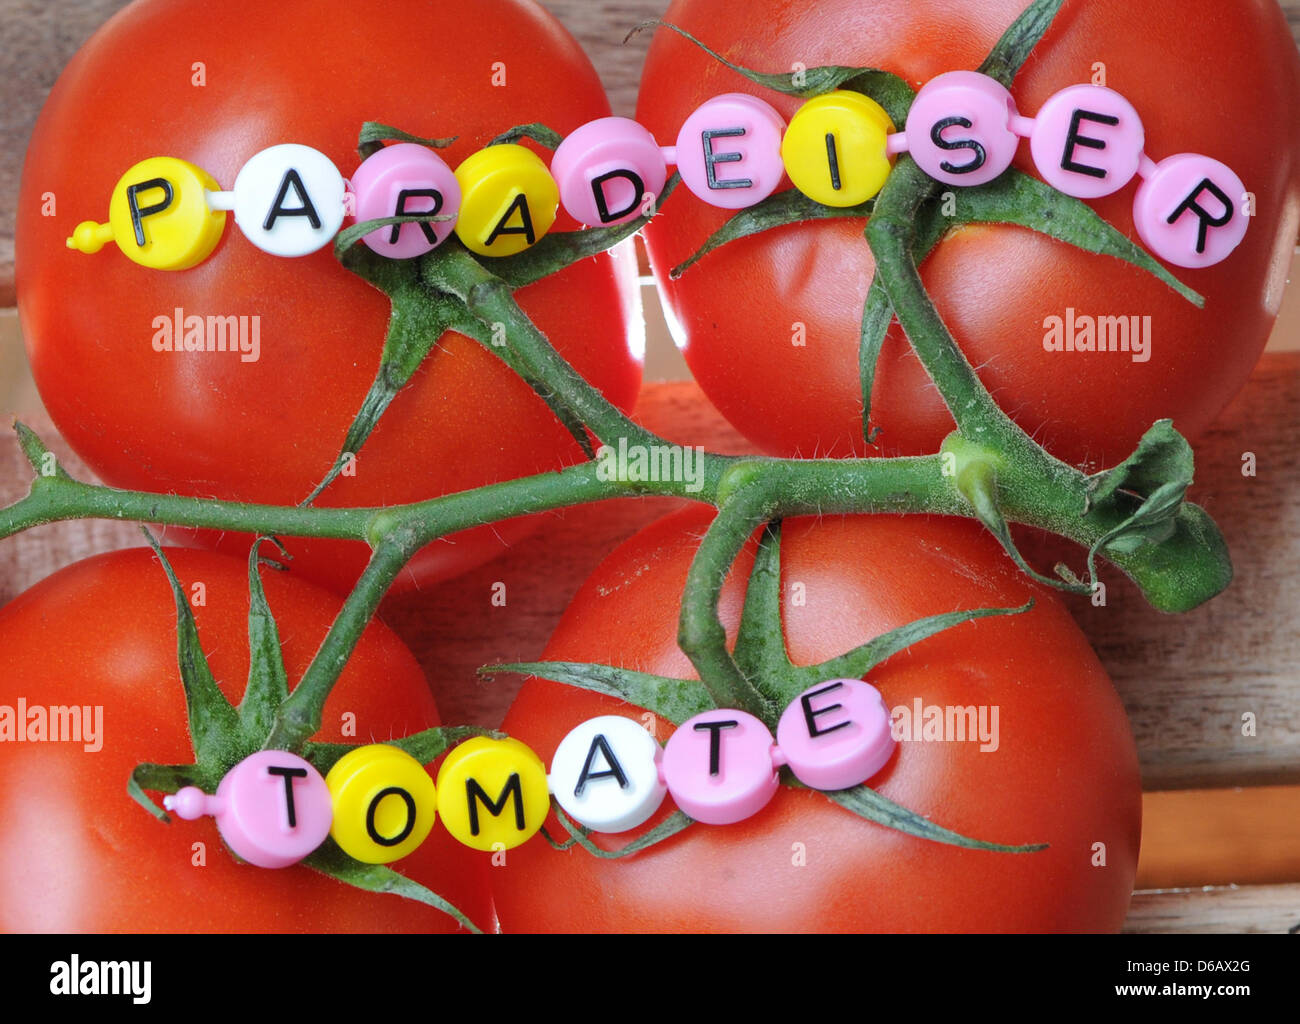 Illustration - The words 'Paradeiser', which is Austrian for Tomatoe, and the German term 'Tomate' are put together with letters of a board game and situated on tomatoes in Berlin, Germany, 10 August 2012. The term 'Paradeiser' is the Austrian name for tomatoe. Photo: Jens Kalaene Stock Photo